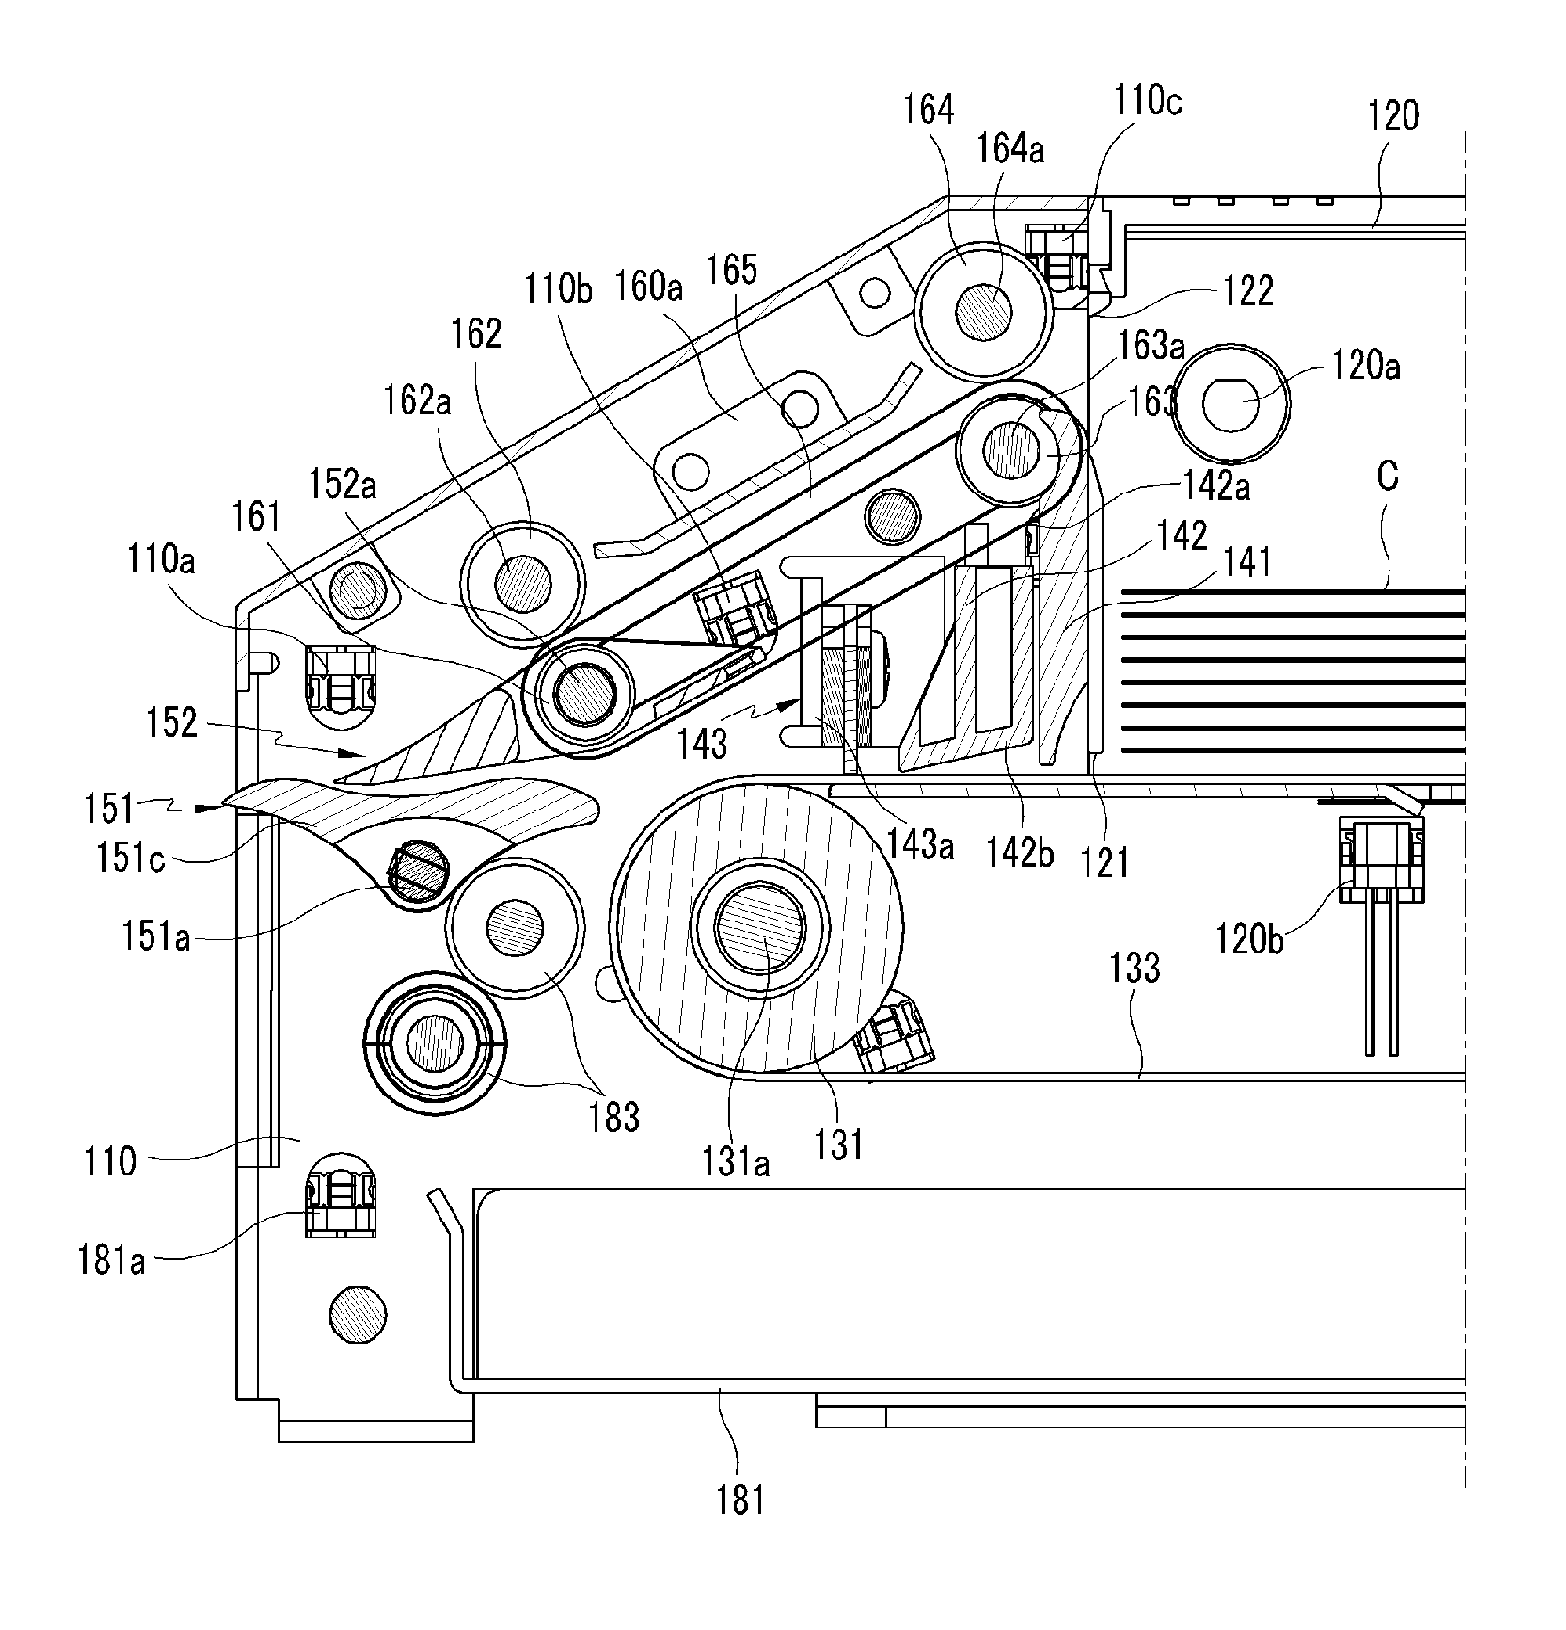 Gaming card processing device enabling the first-in-first-out management of rewritable cards